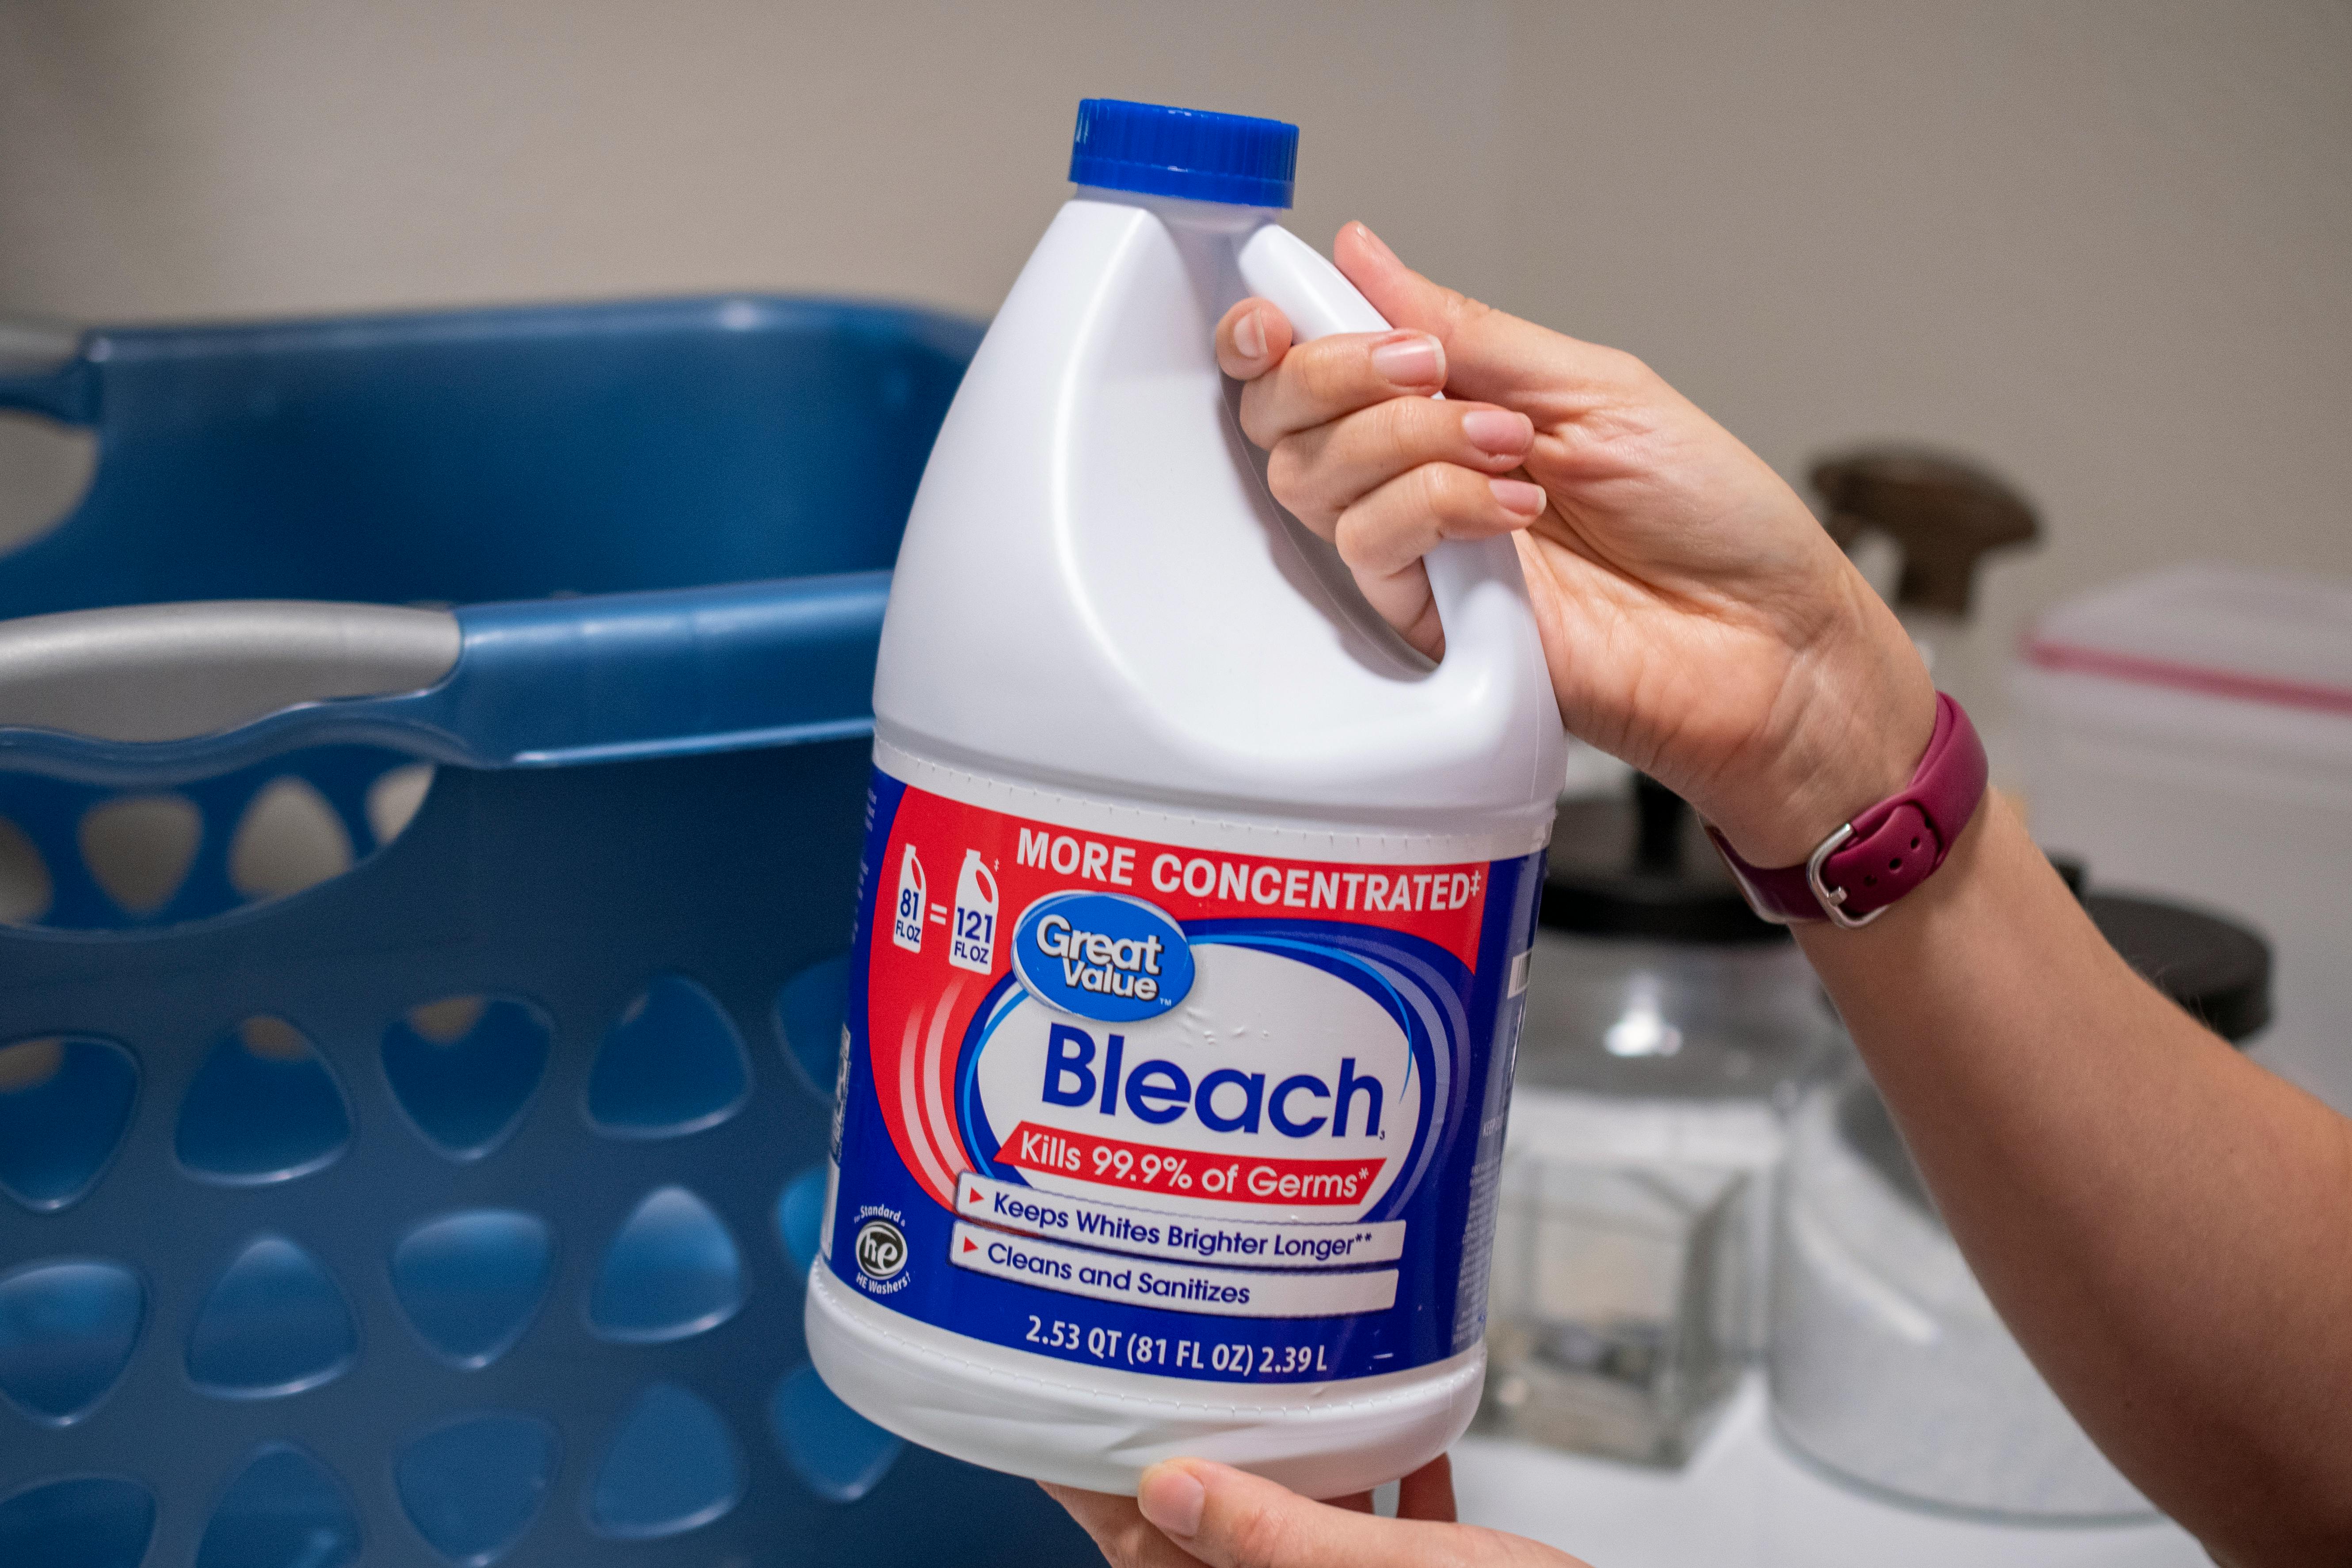 A person holding a bottle of bleach next to a washing machine.